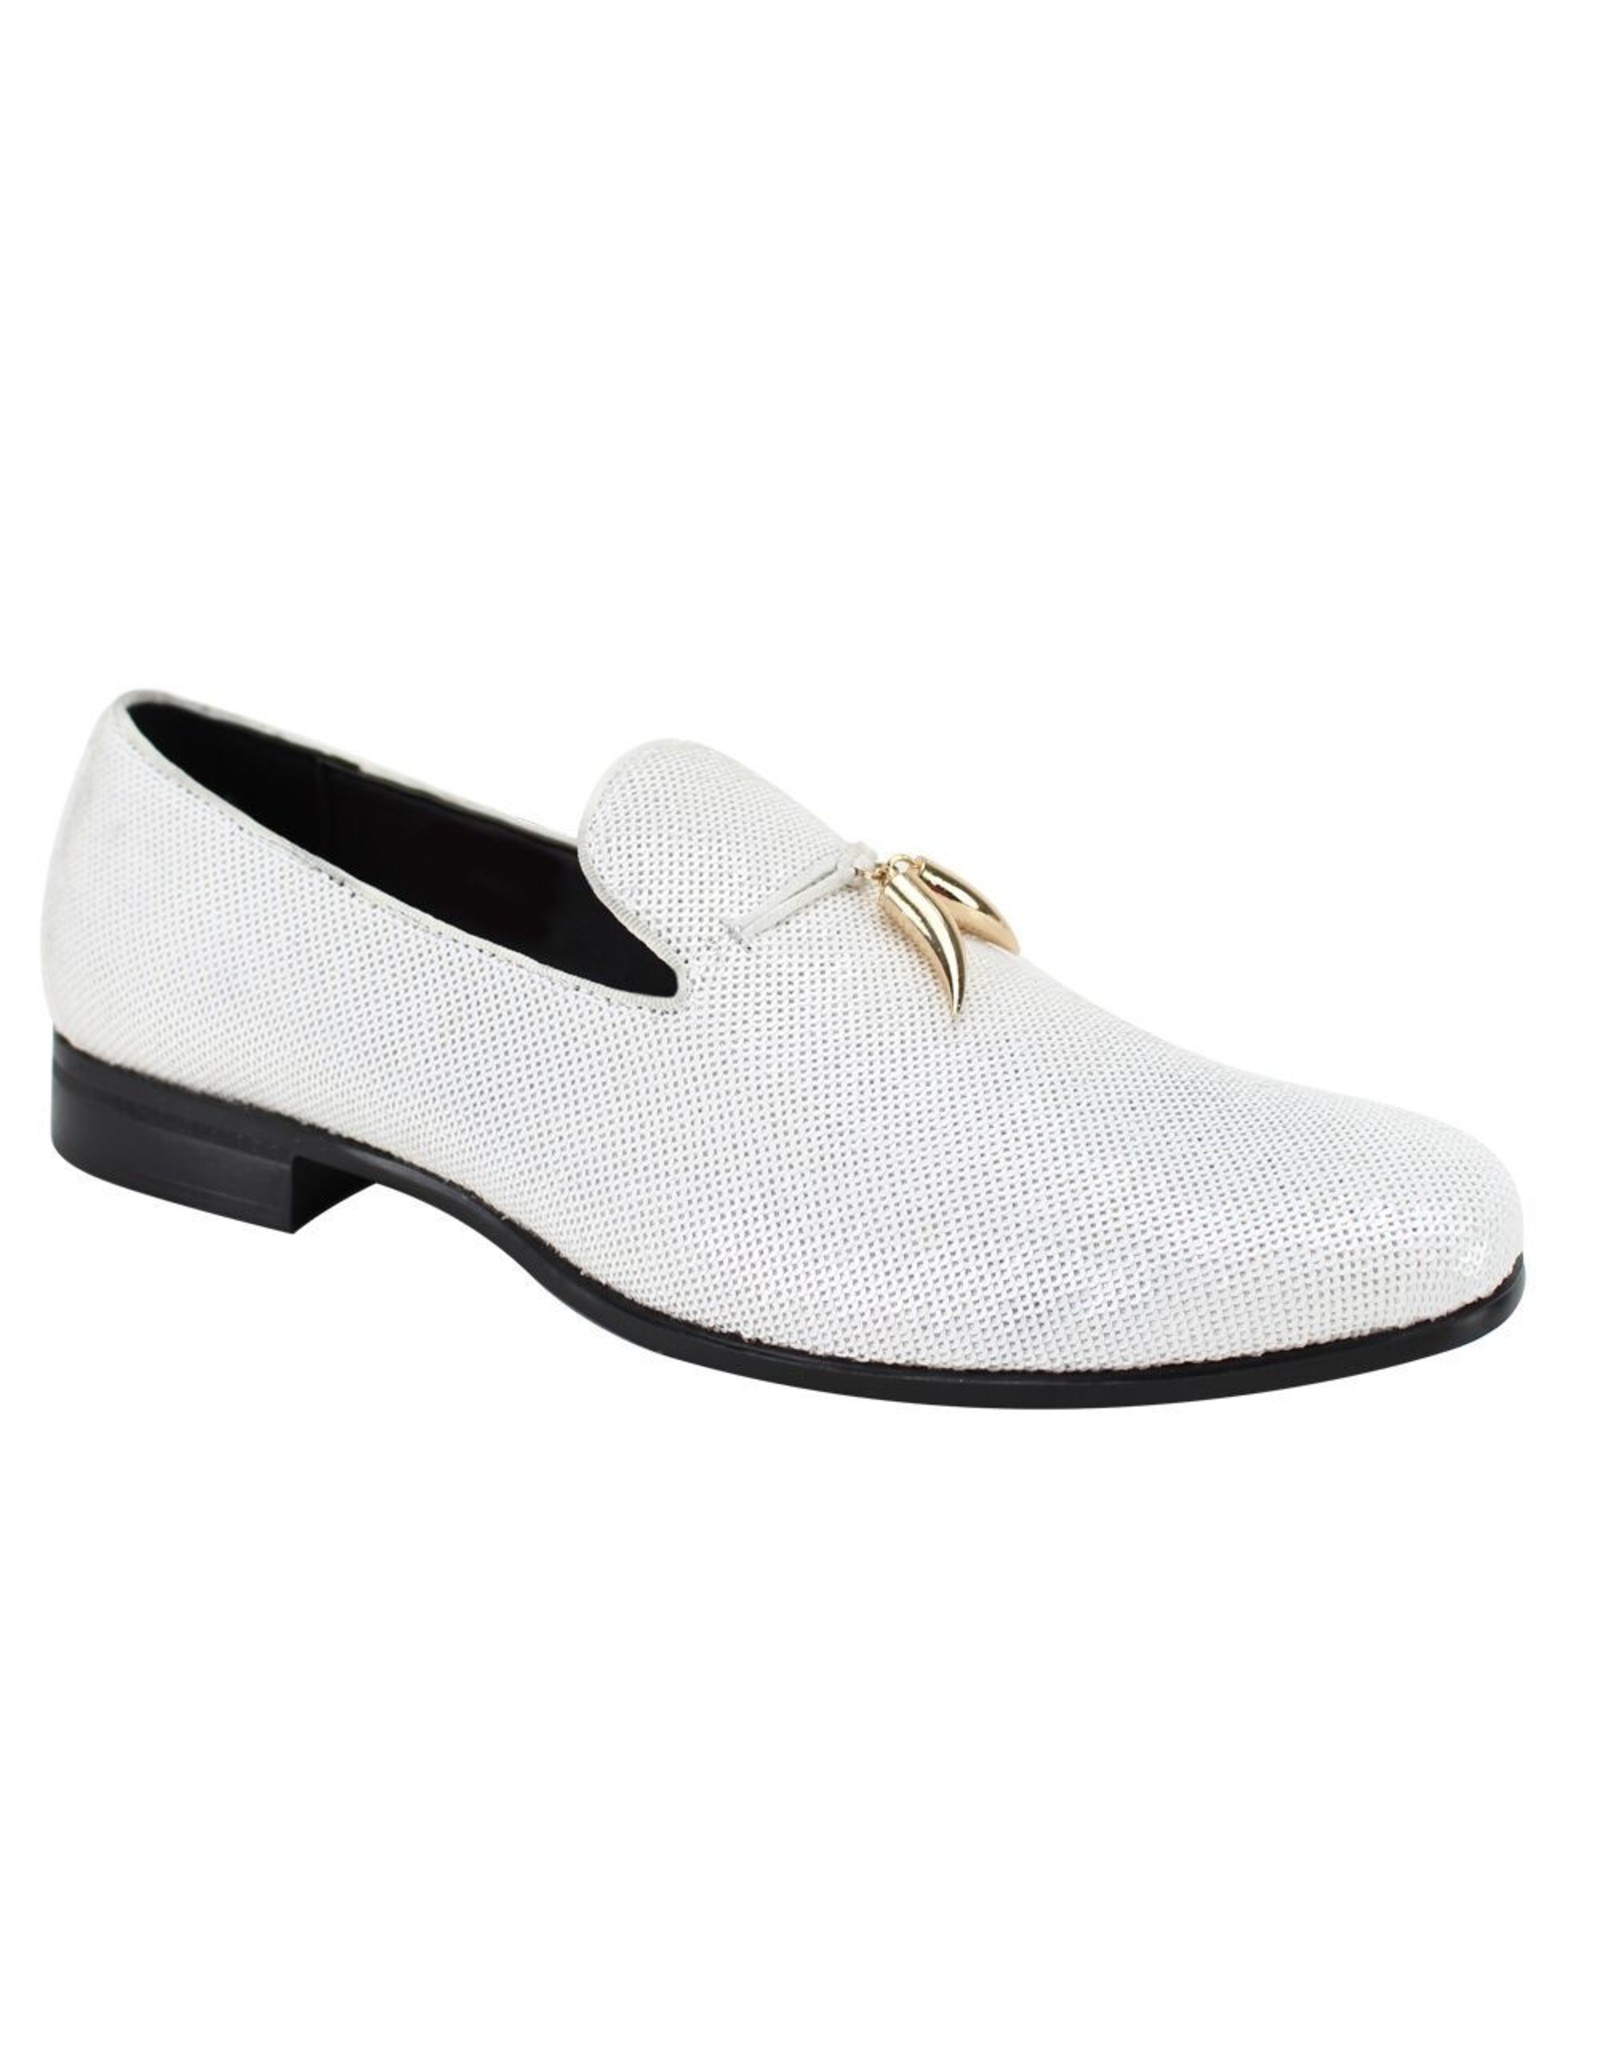 After Midnight After Midnight Formal Shoe - 6759 White